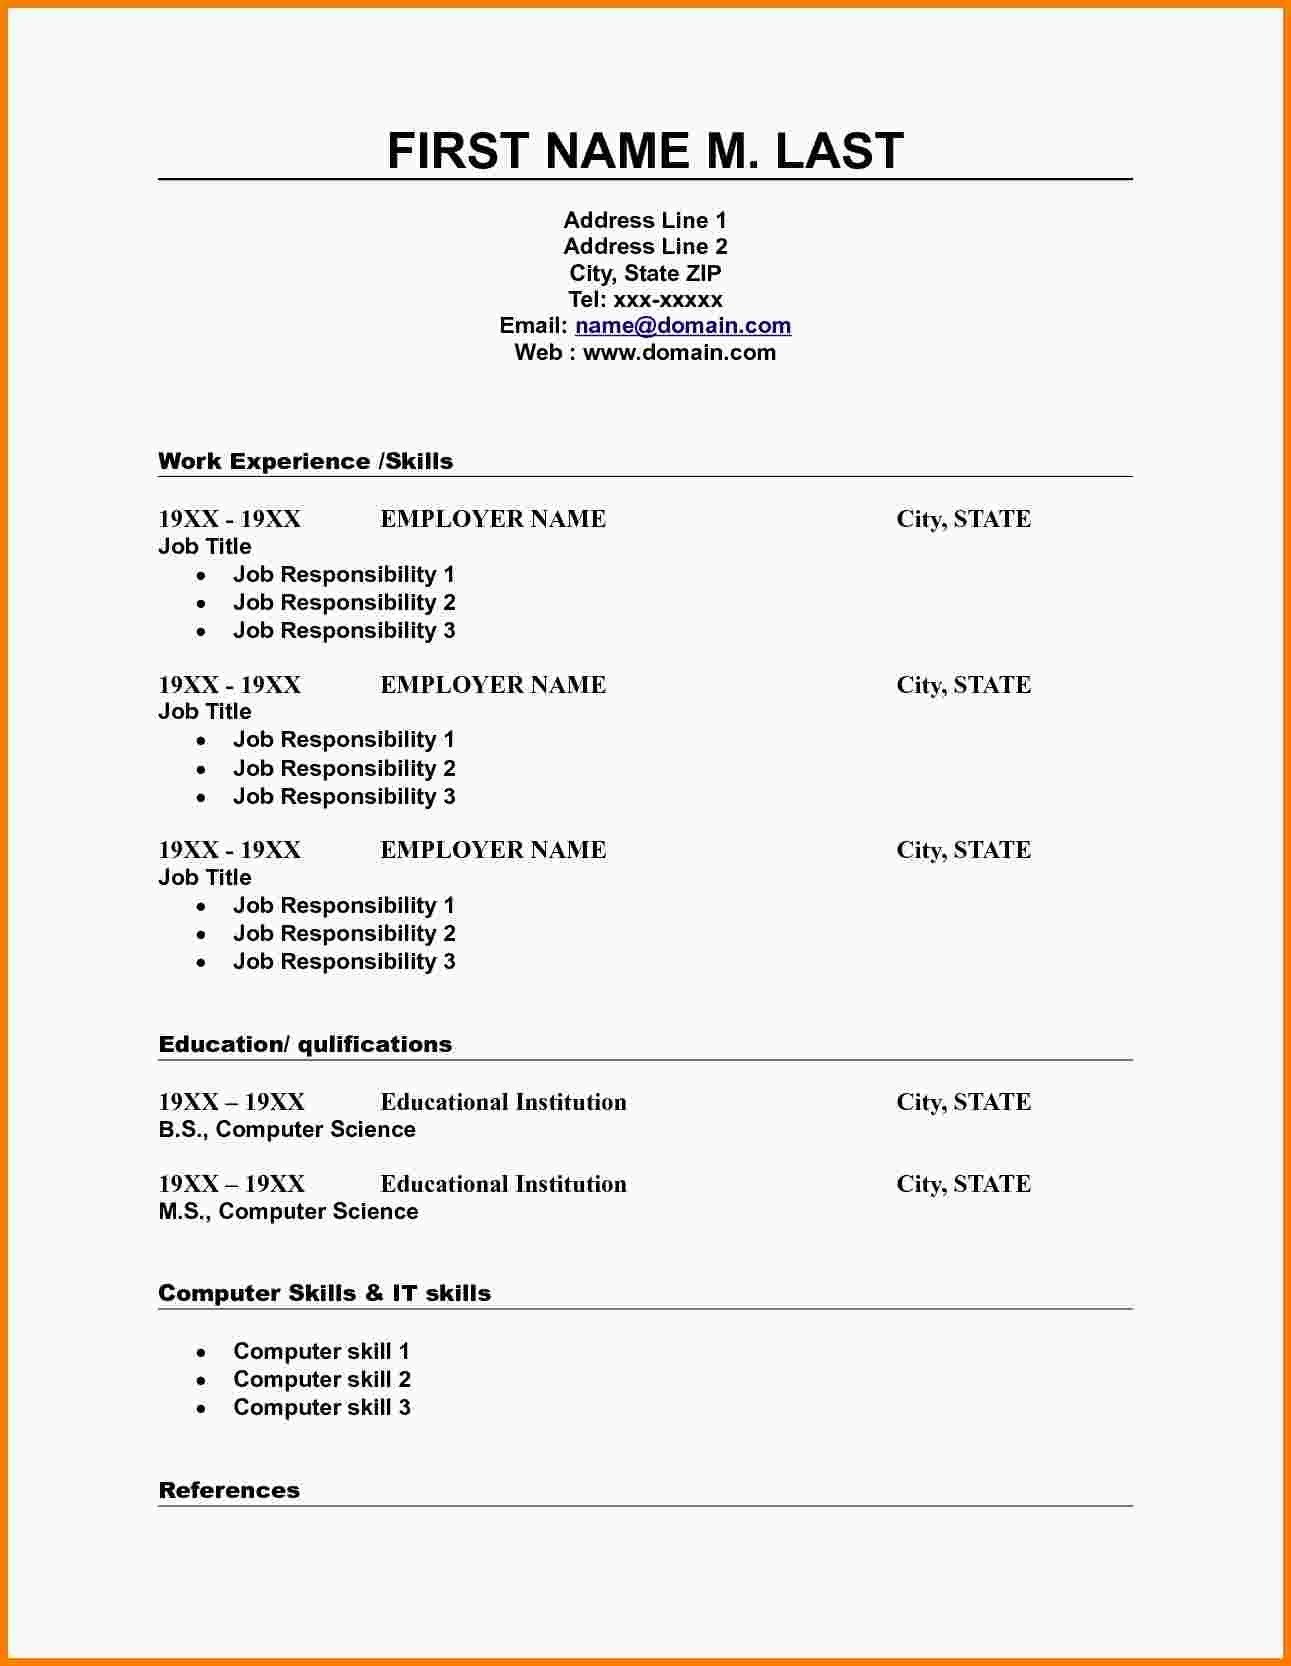 Resume Templates Free Printable 8 Free Fill In the Blanks Resume